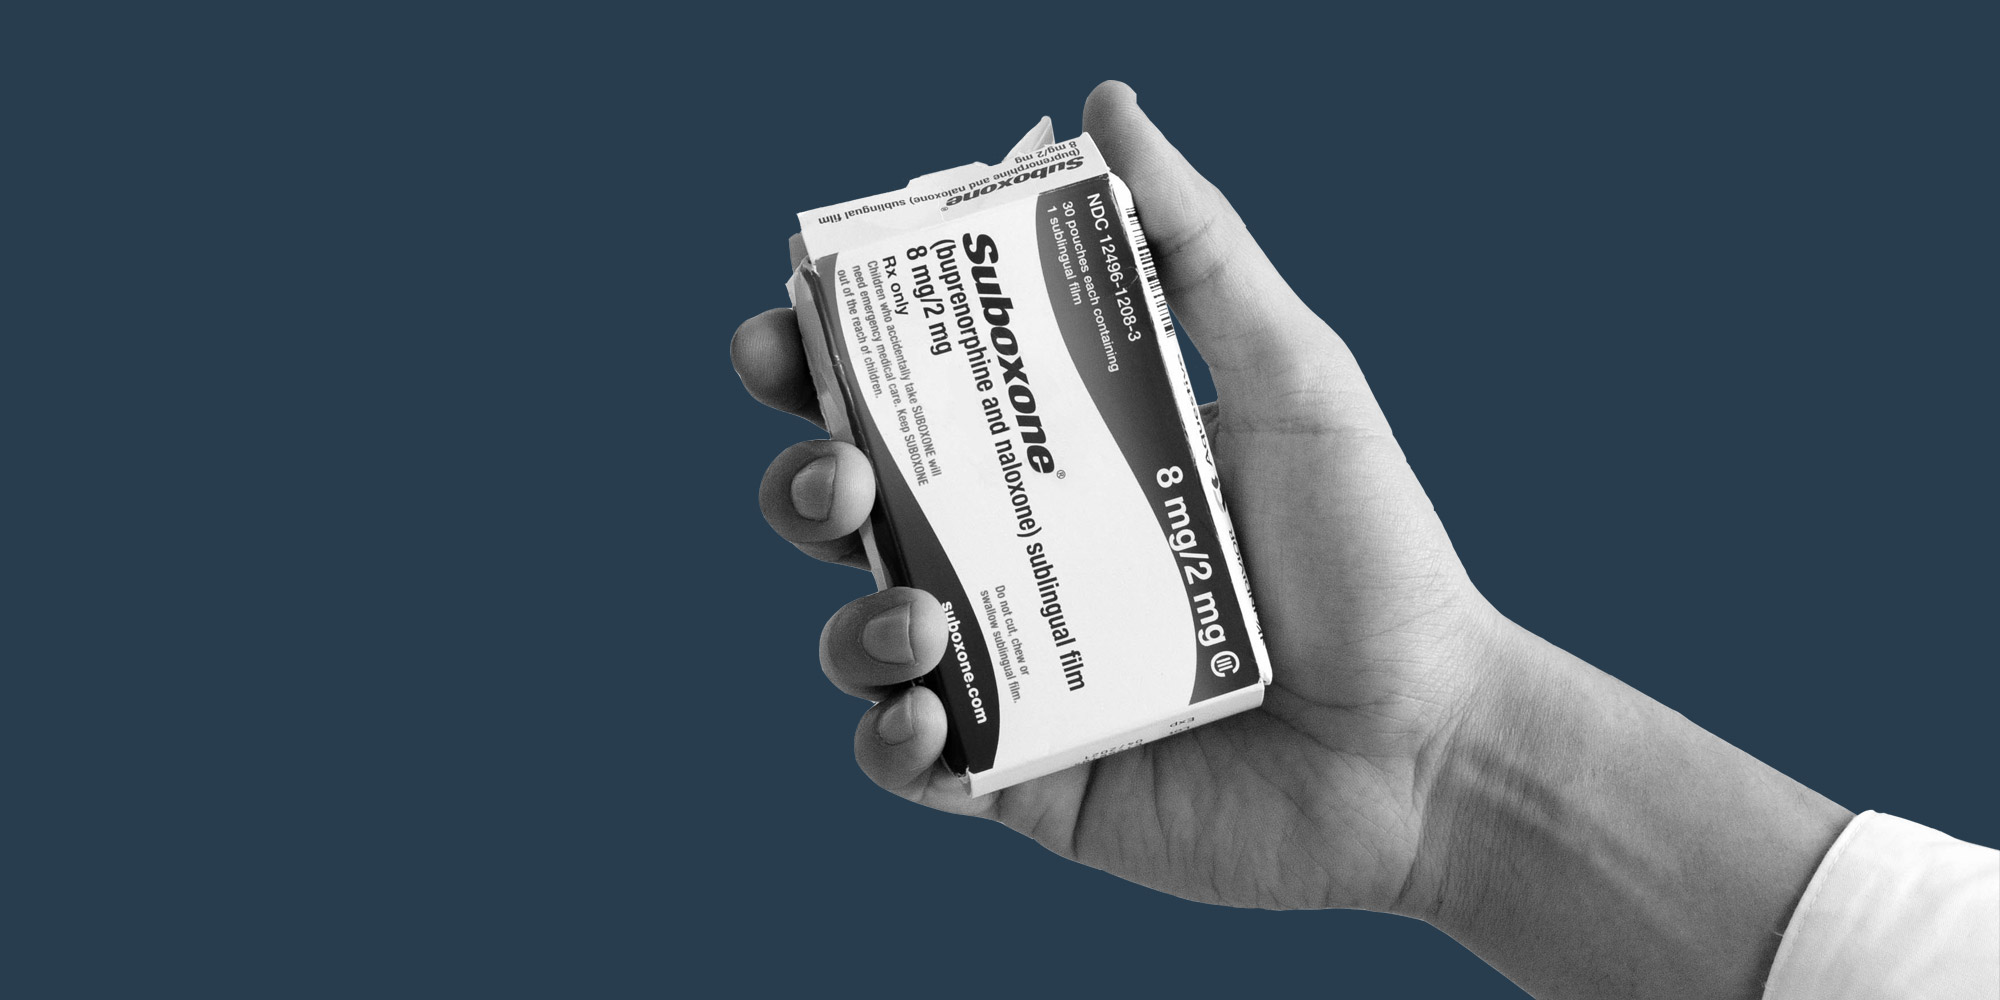 Hand holding a Suboxone box against a dark blue background